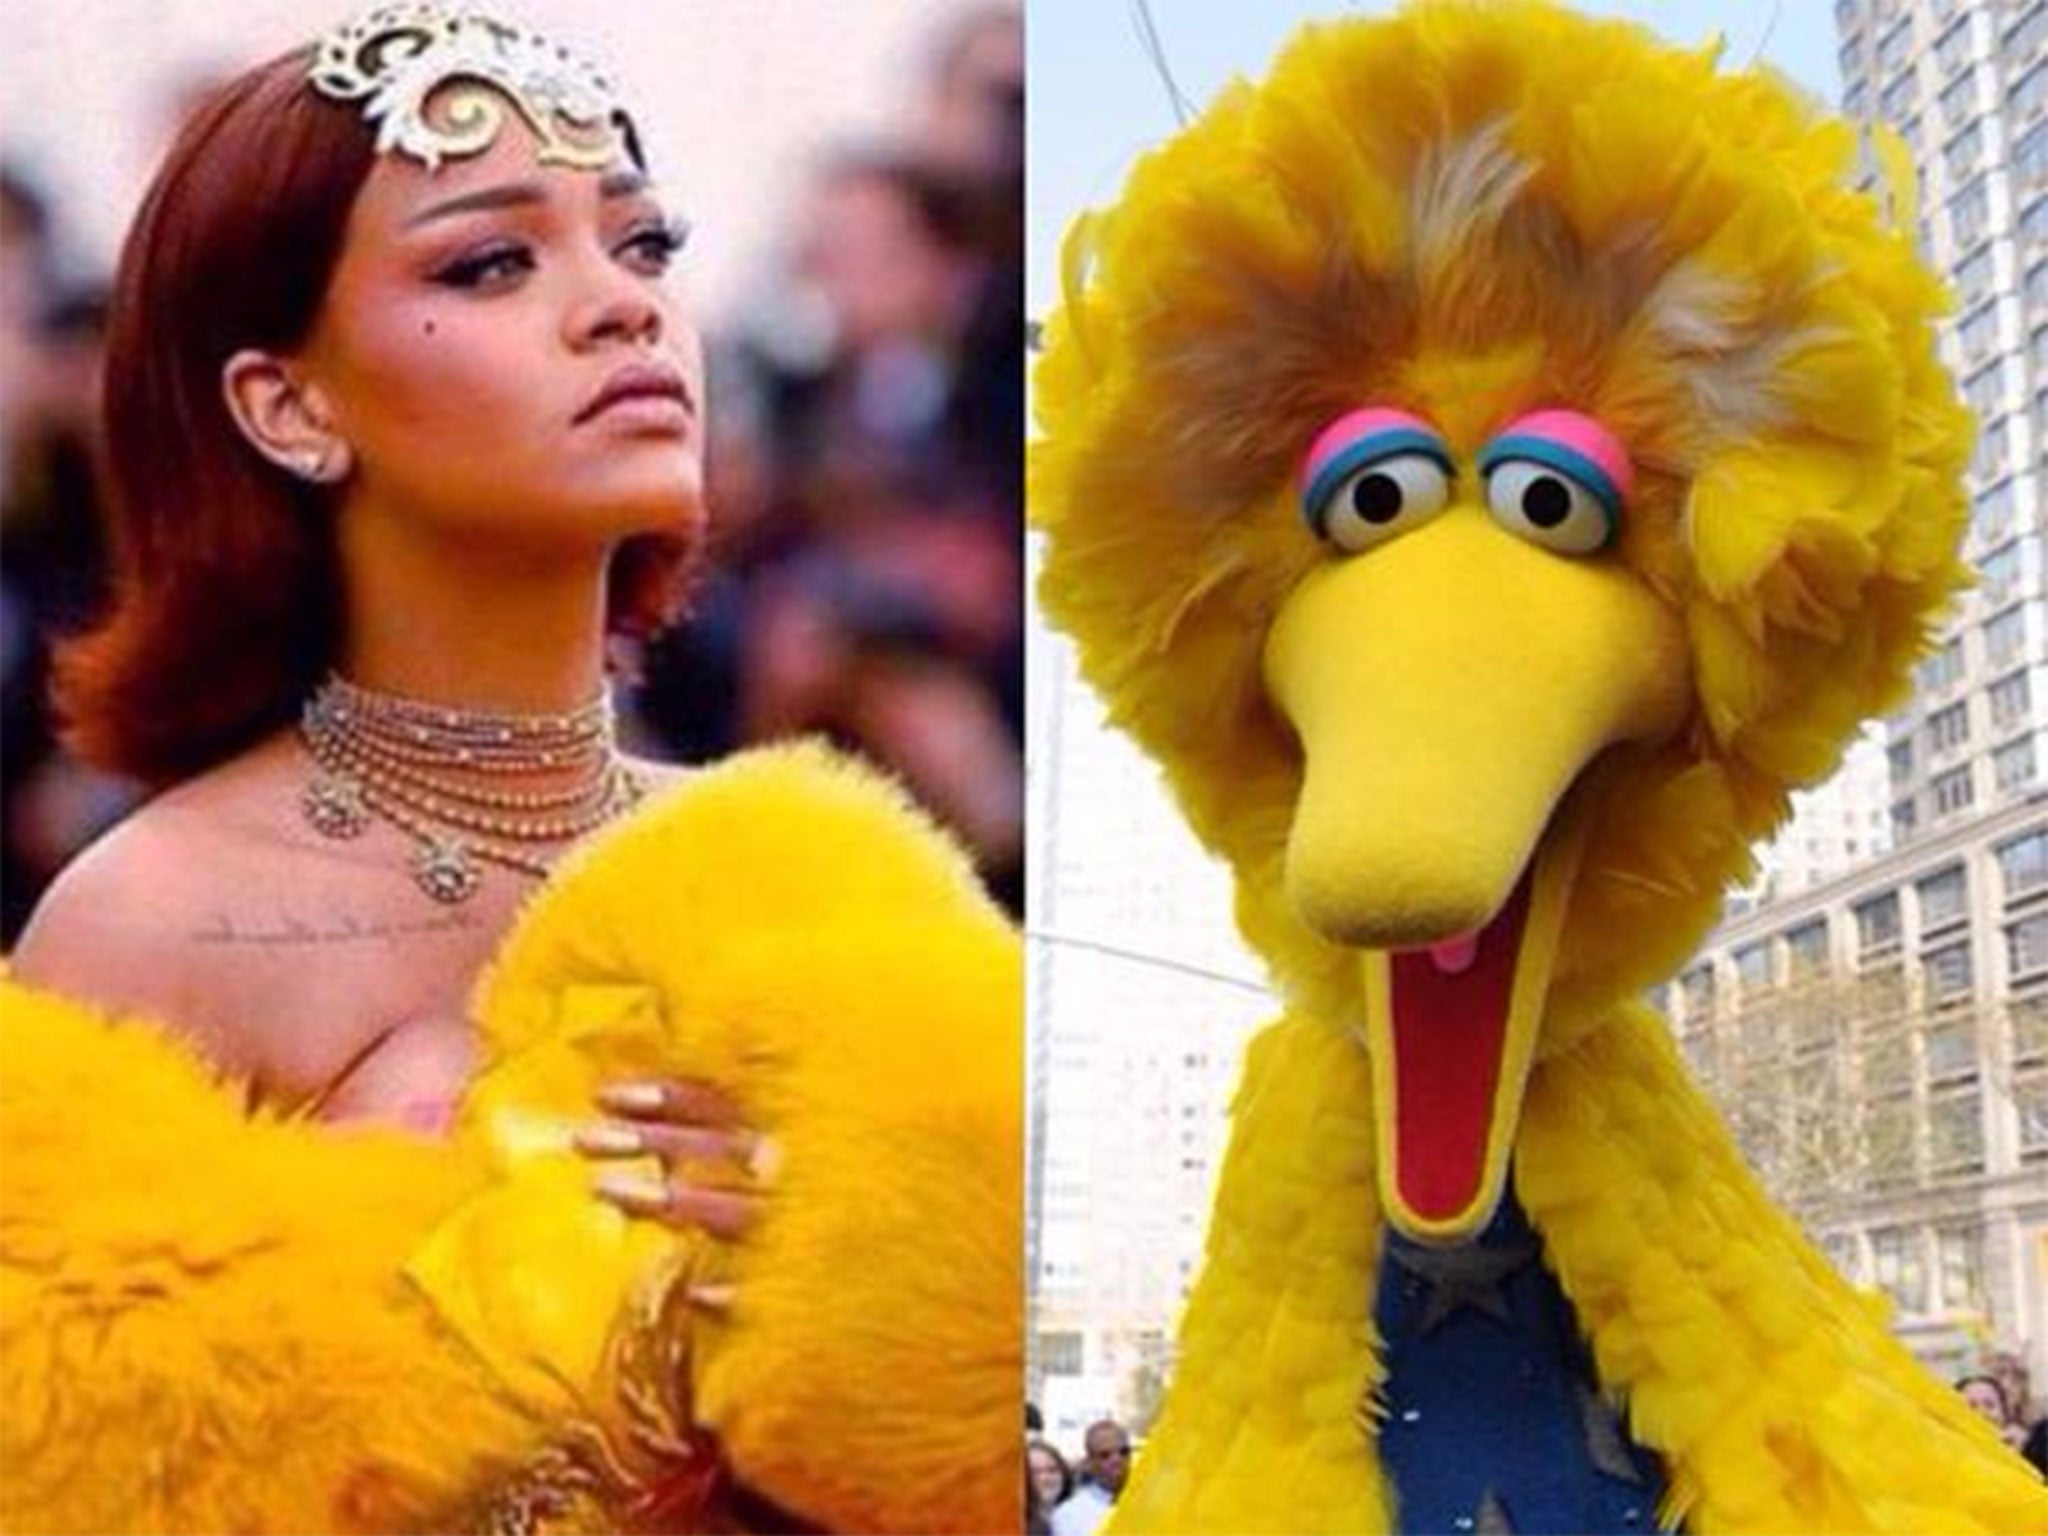 The internet had a great time with the Met Gala ball